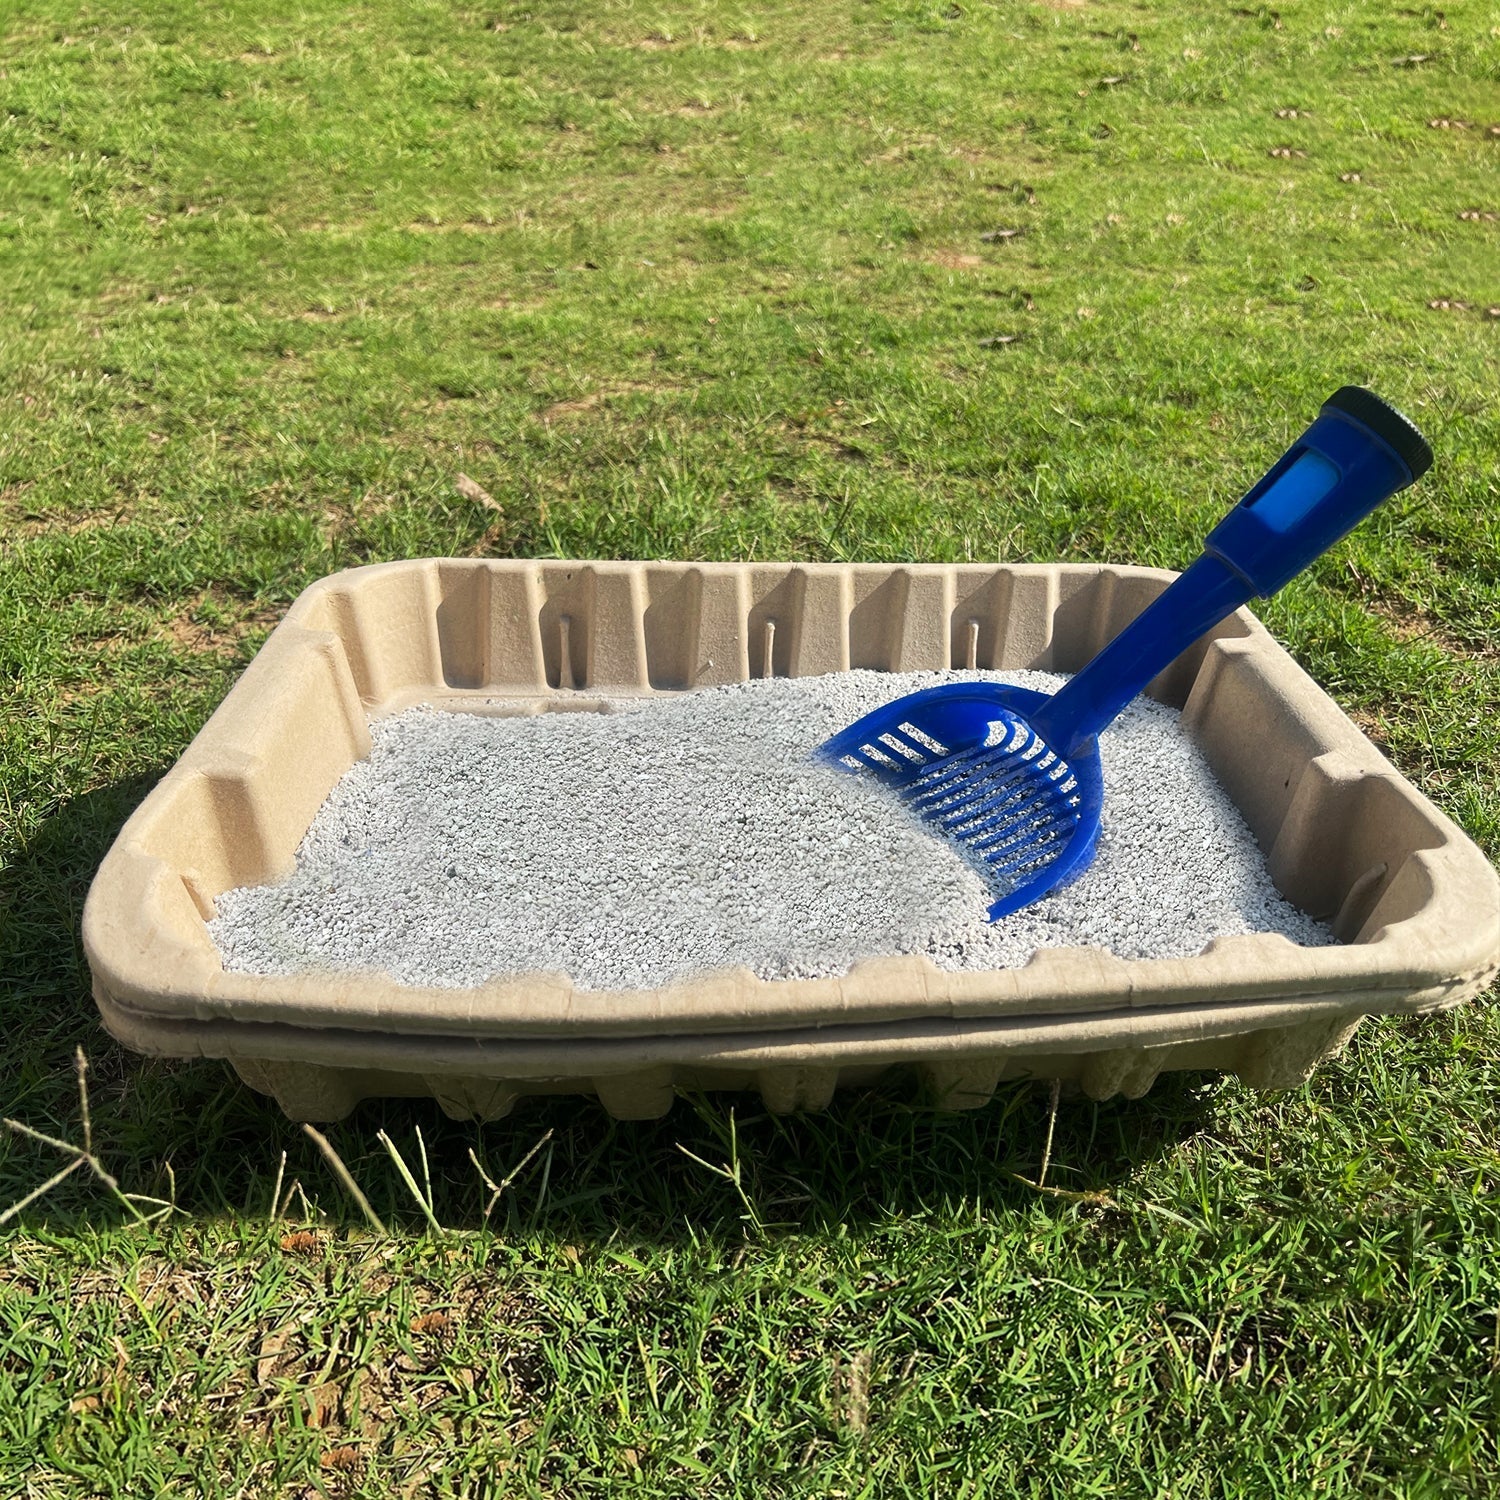 Showing bentonite cat litter in a tray